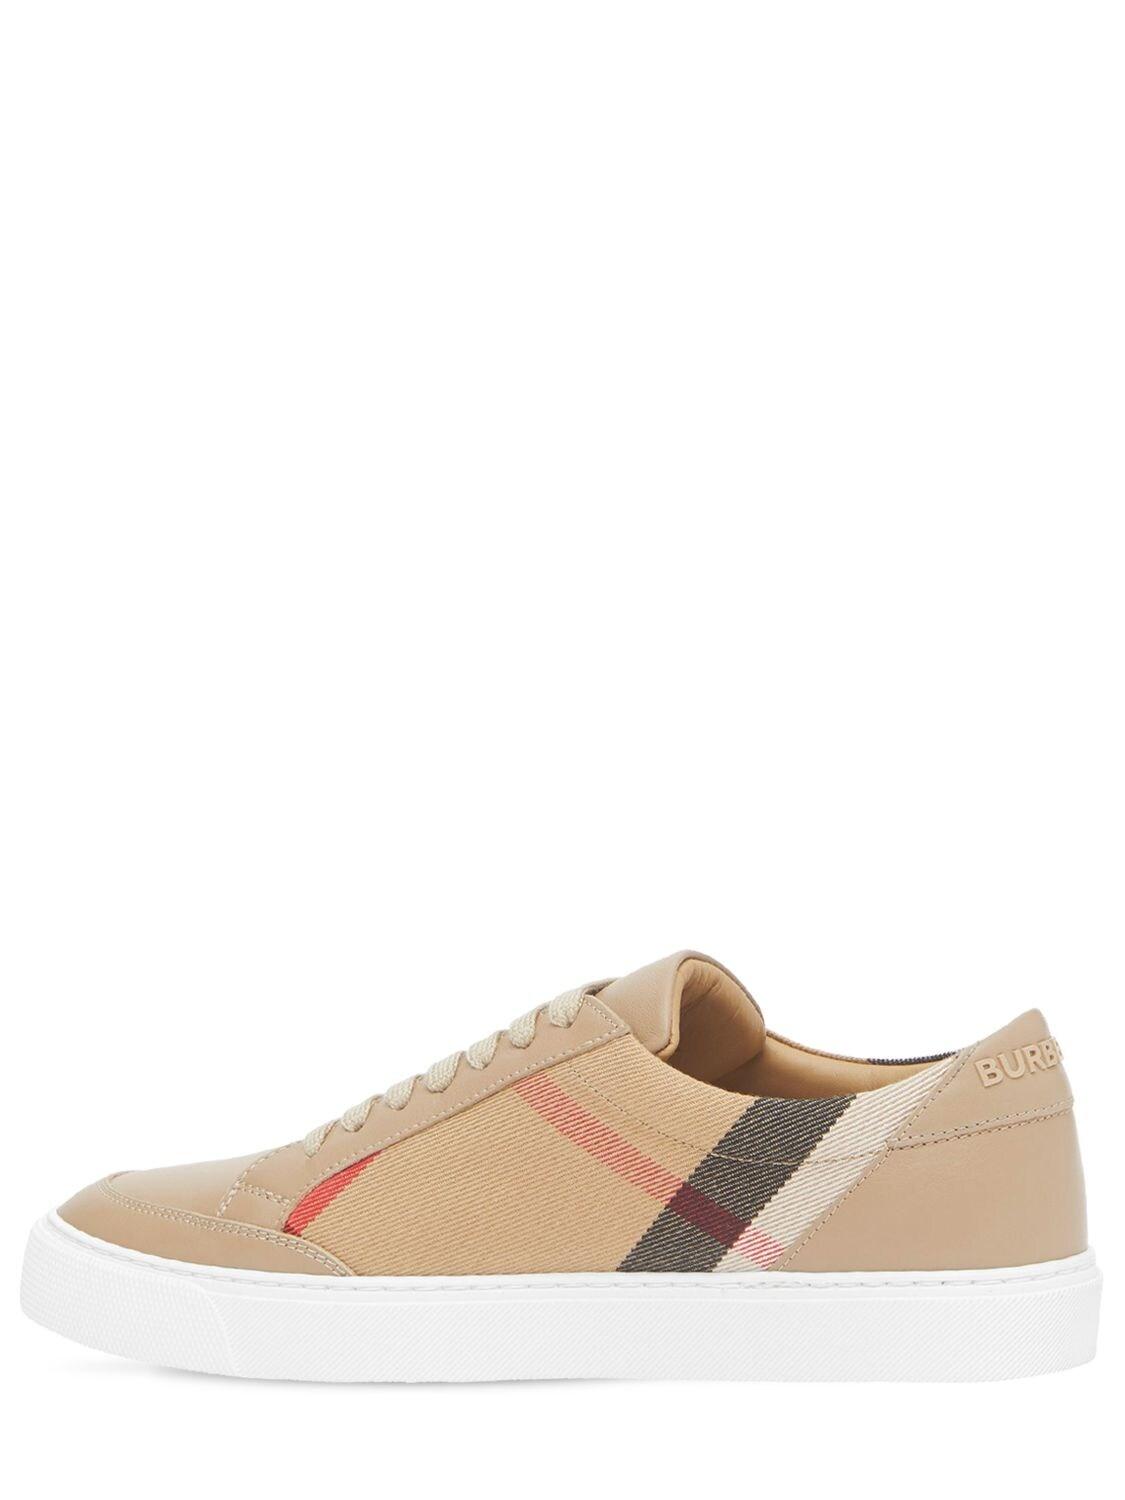 Burberry 20mm Salmond Leather & Check Sneakers in Natural - Lyst